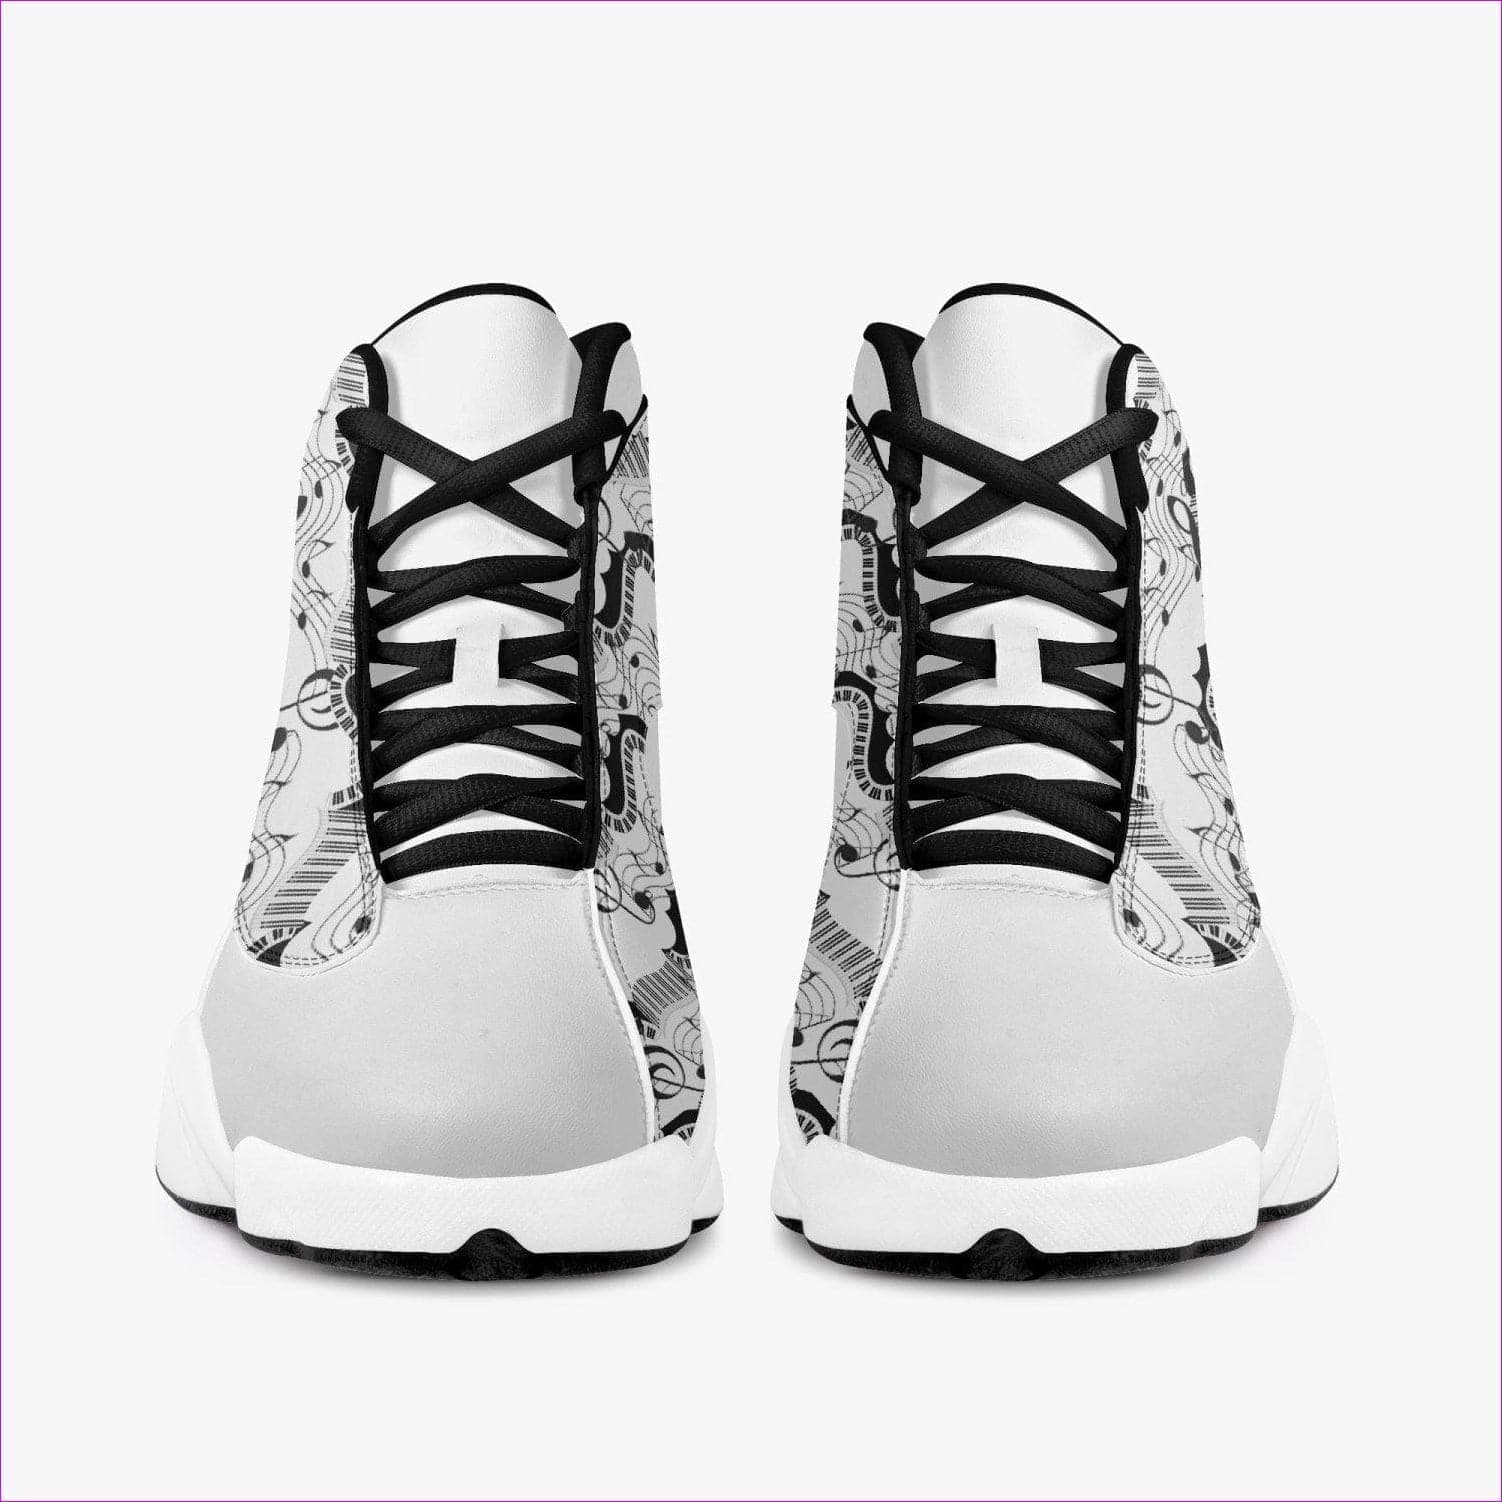 - Keys High-Top Leather Basketball Sneakers - unisex shoe at TFC&H Co.